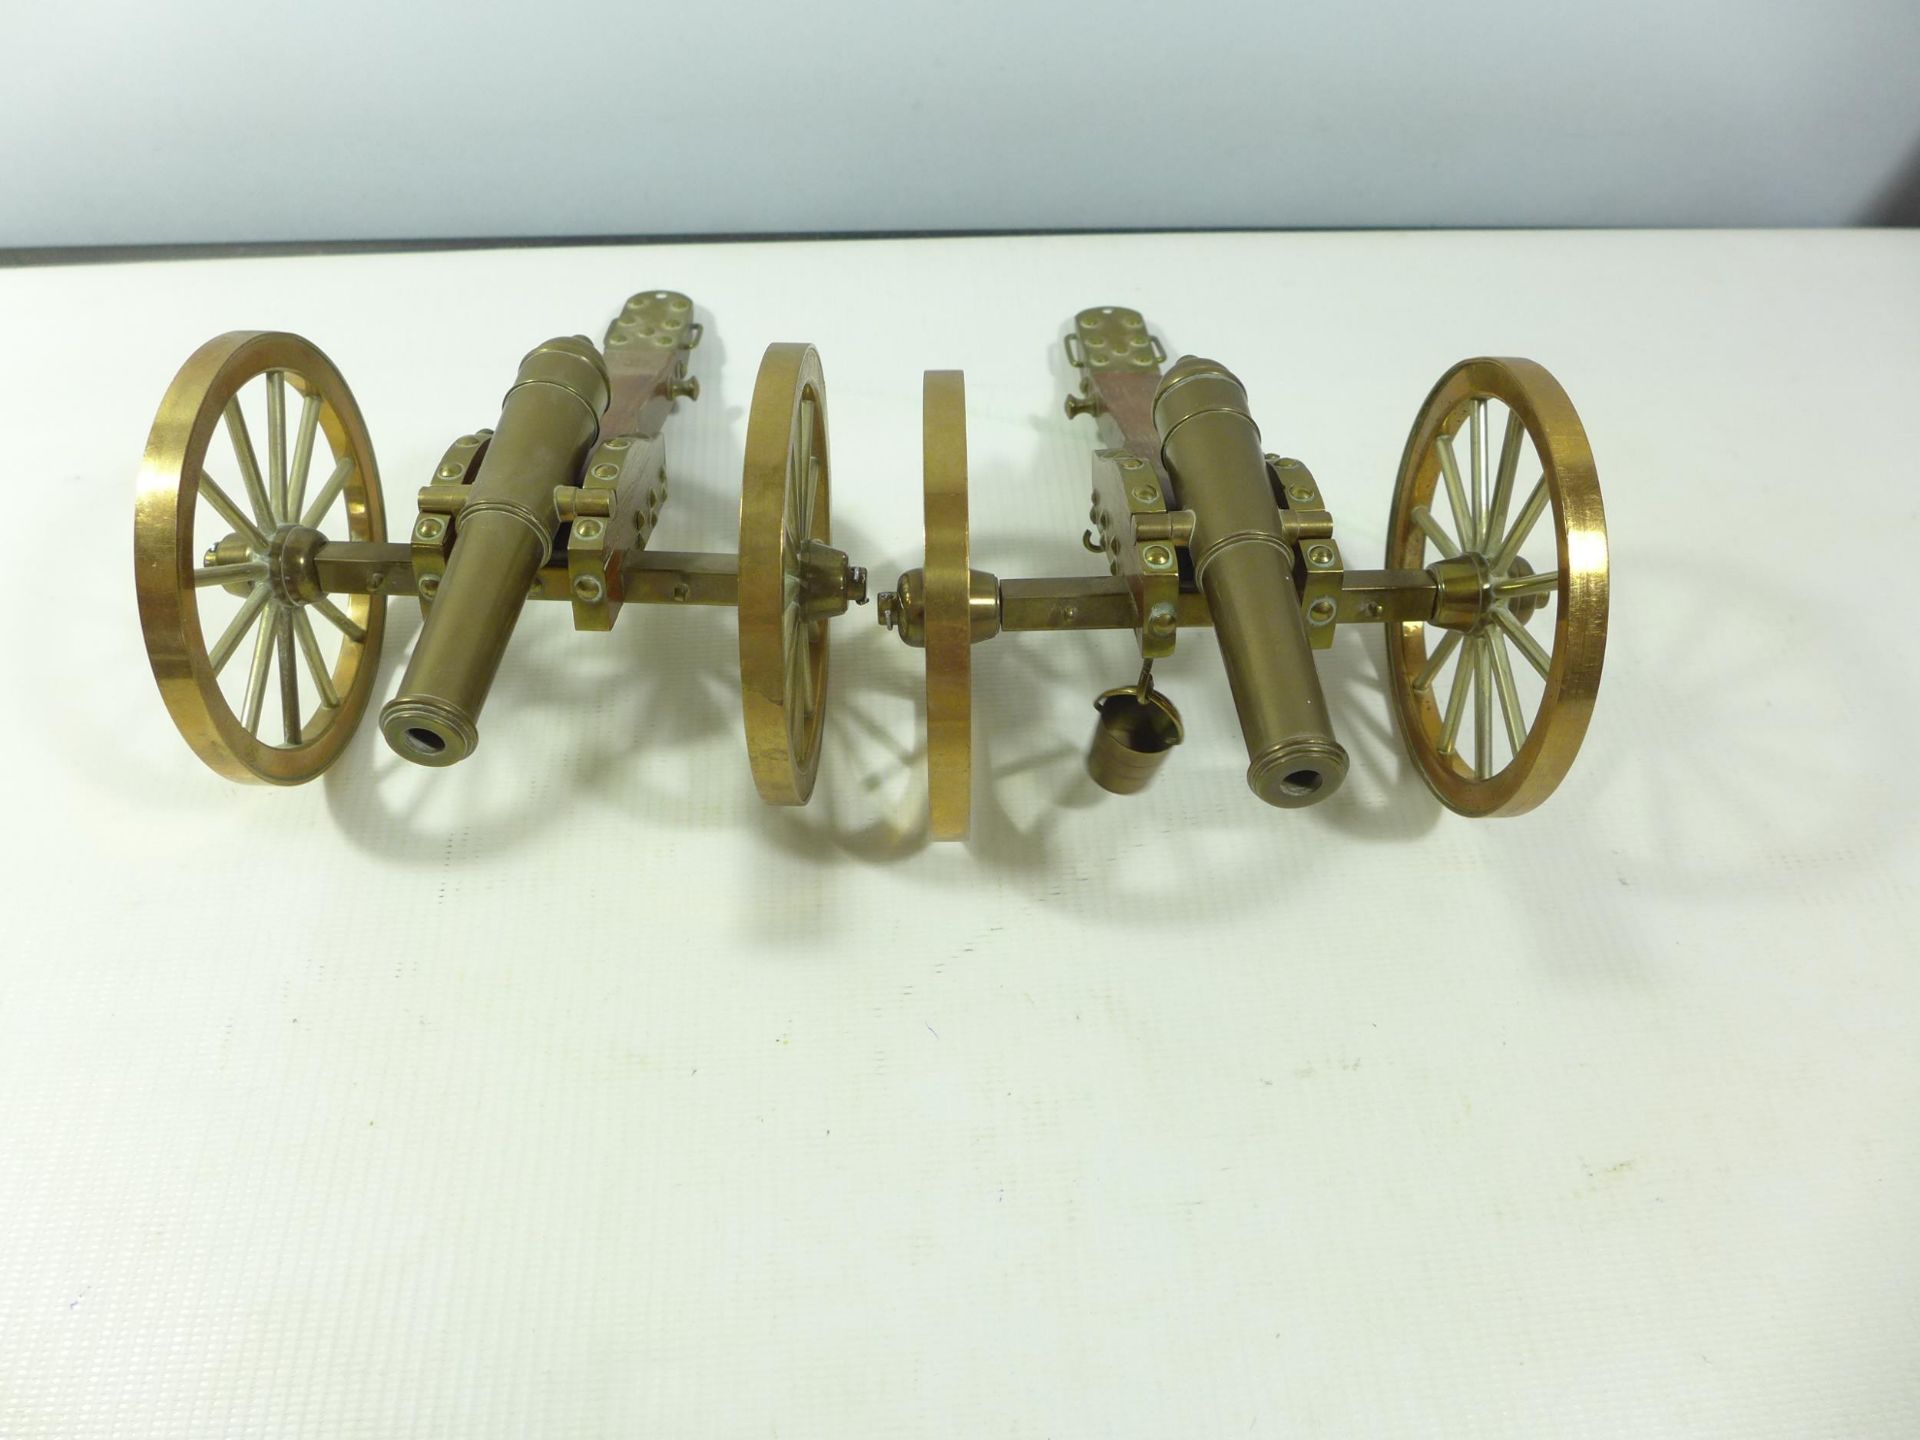 A PAIR OF 20TH CENTURY NAPOLEONIC WAR MODEL CANNONS ON WOOD CARRIAGES, 11CM BARRELS - Image 3 of 4